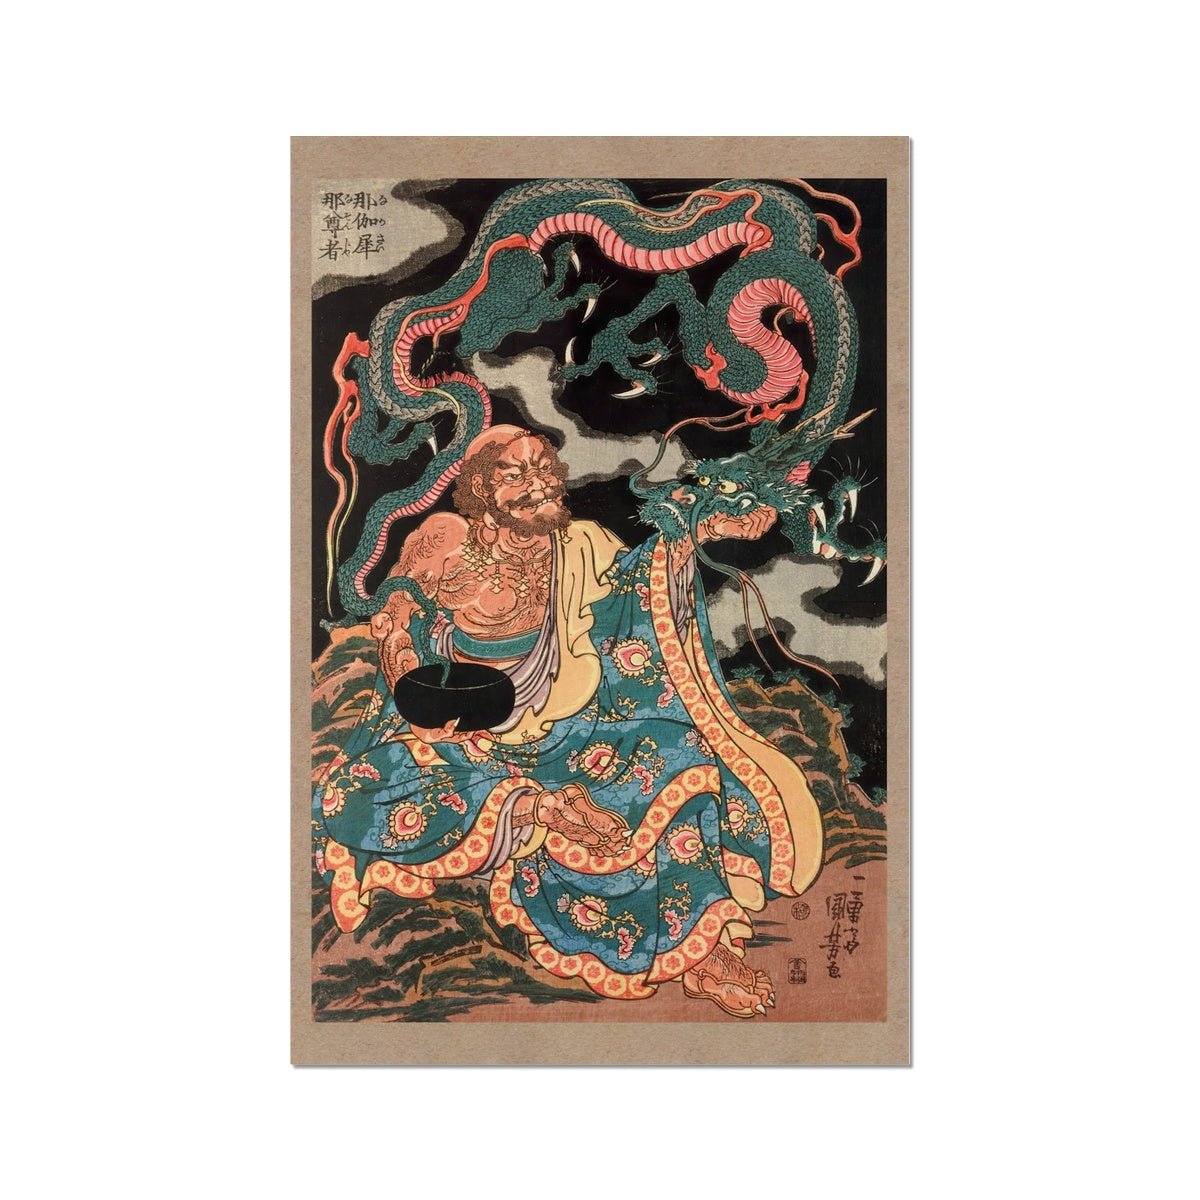 Fine art The Arhat Nakasaina Sonja Seated On a Rock, with Dragon Emerging From His Bowl, Vintage Buddhist Japanese Fine Art Print